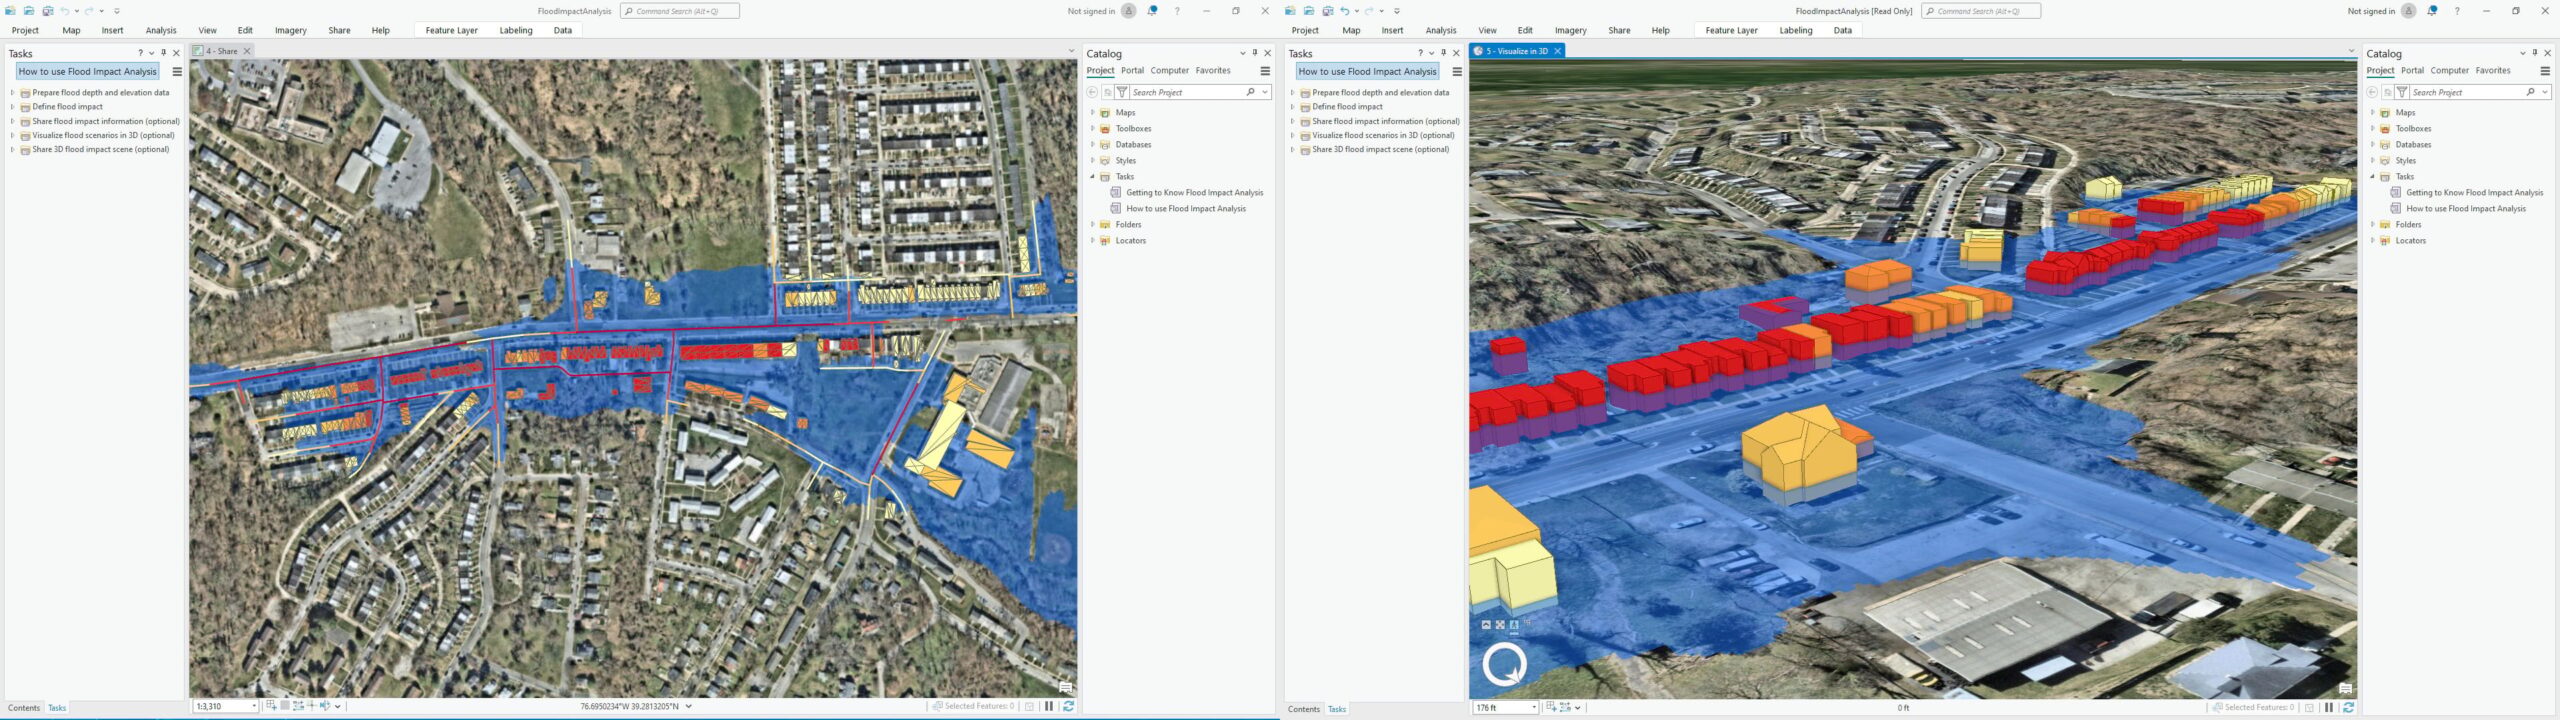 A 2D (left) and 3D (right) view of flood impact analysis results completed for a sample area.